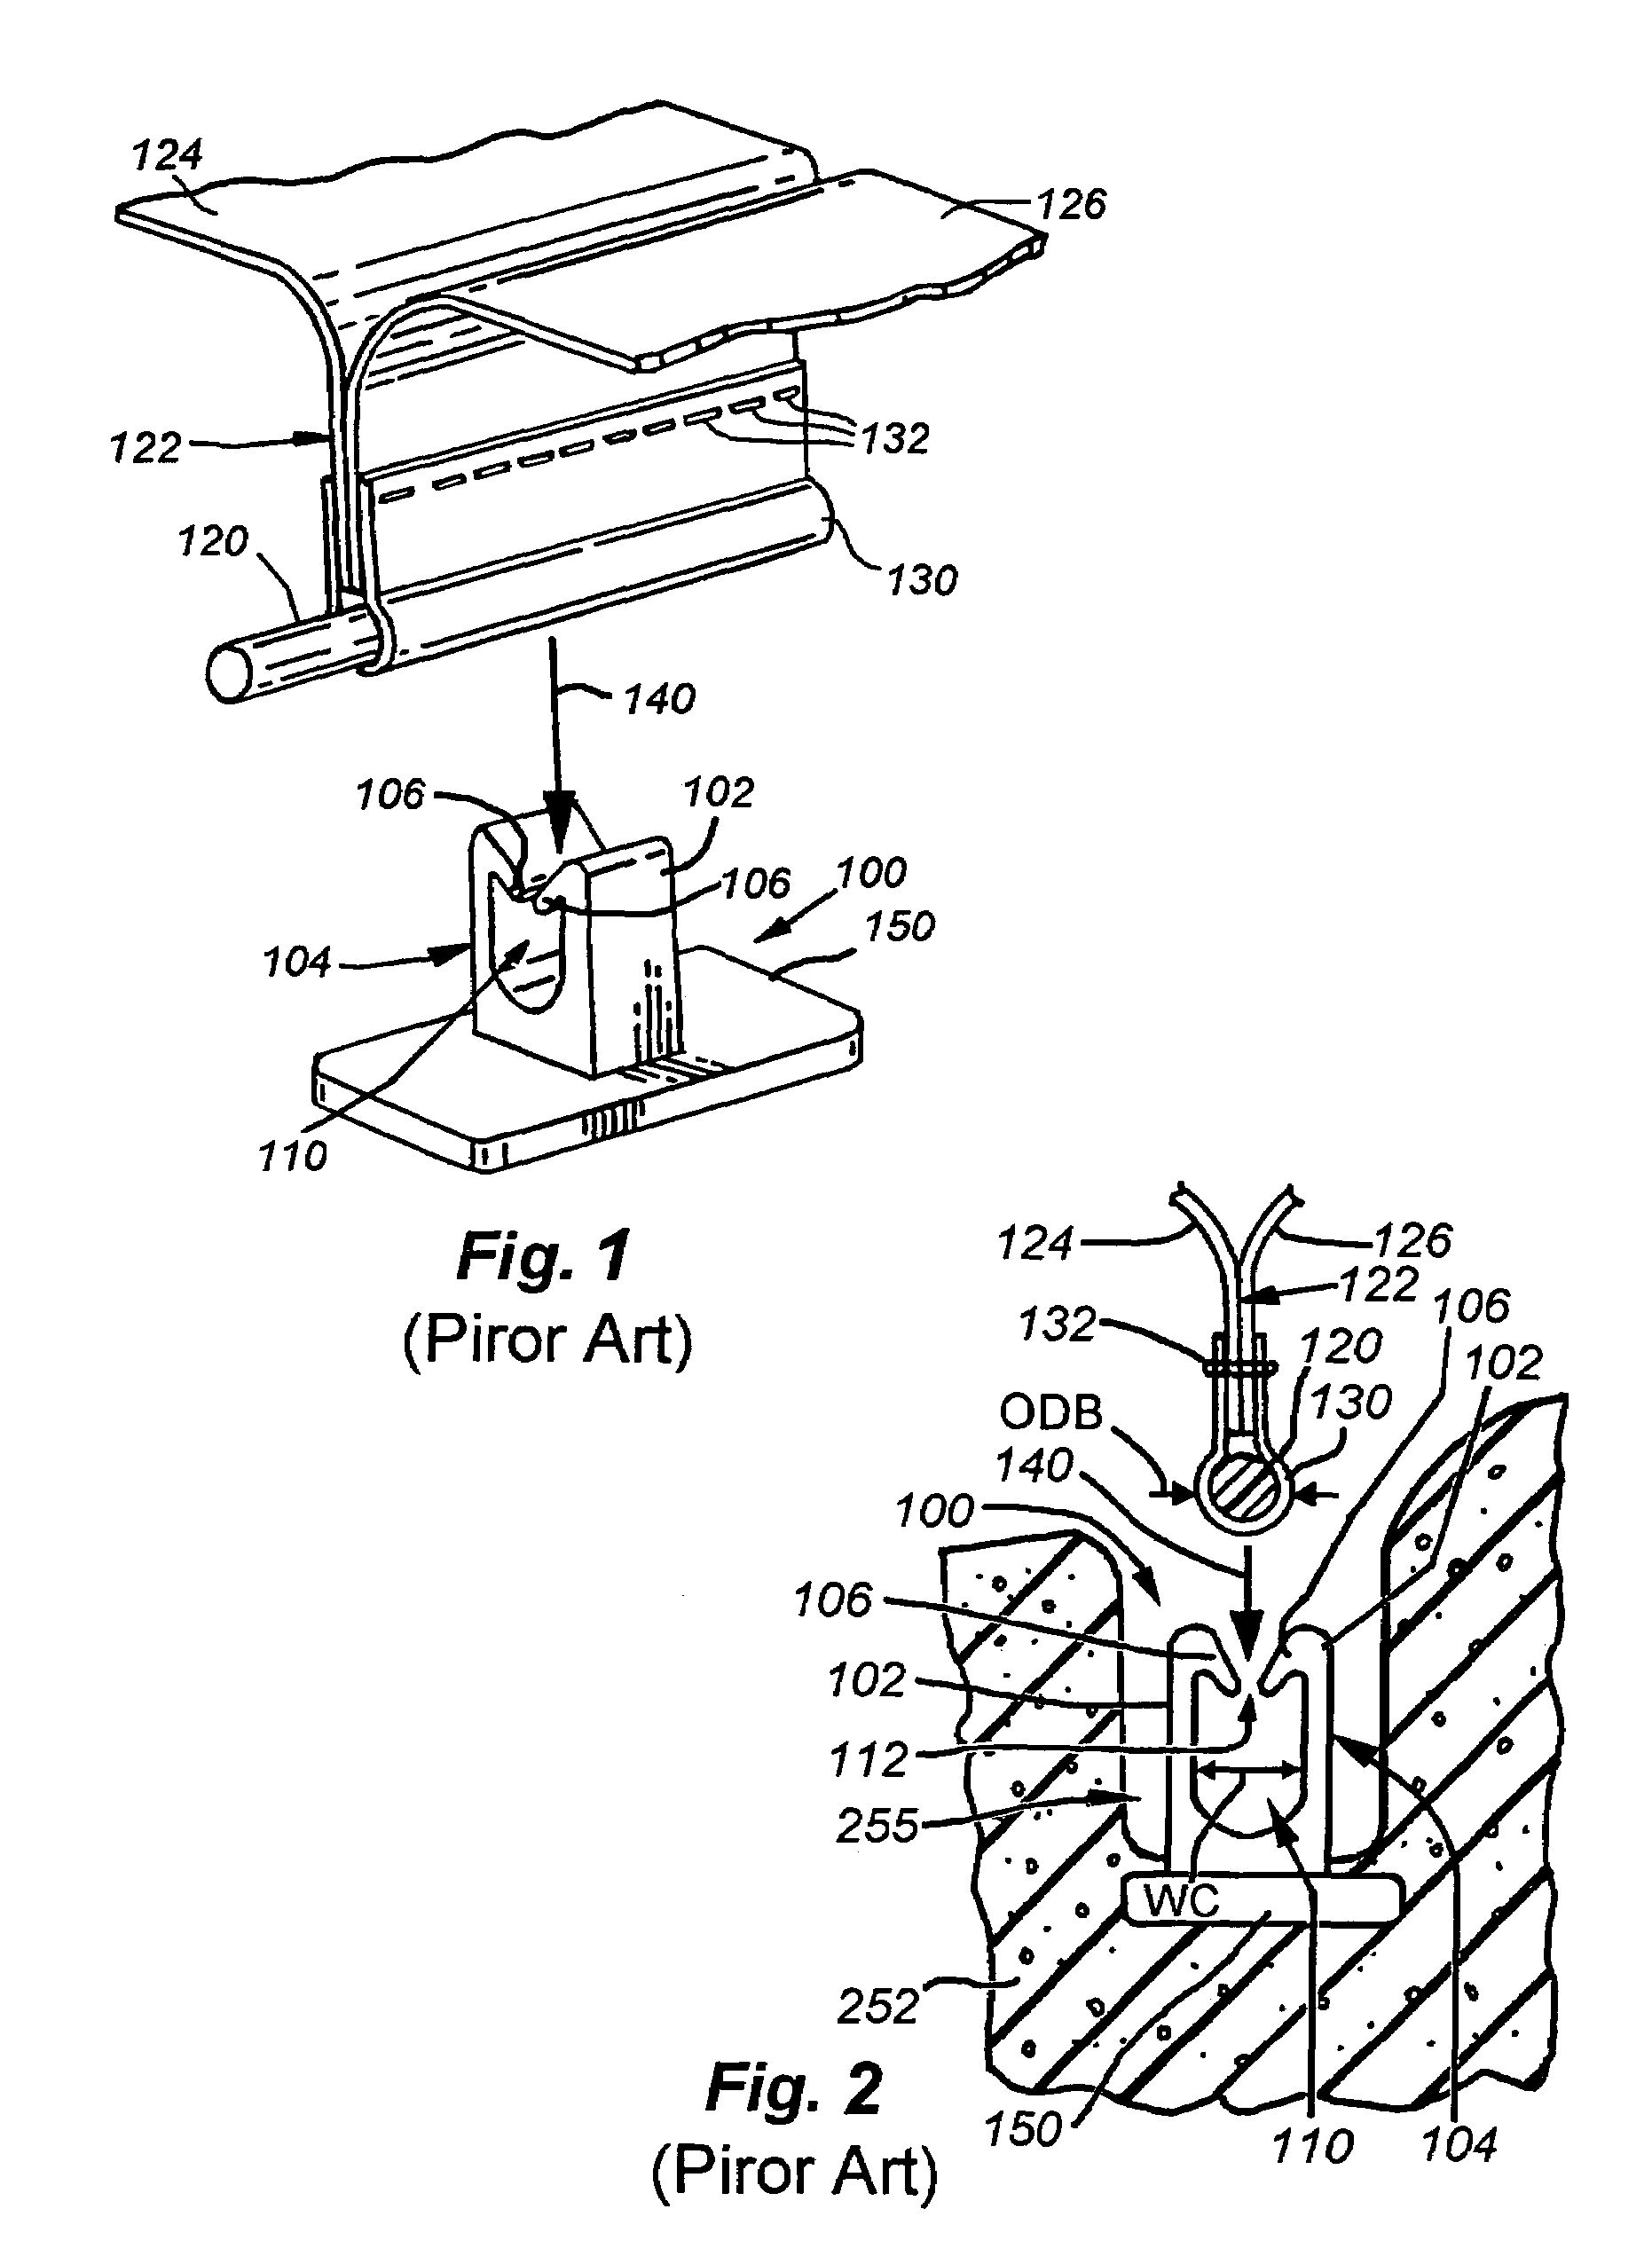 System for attaching trim covers to a flexible substrate